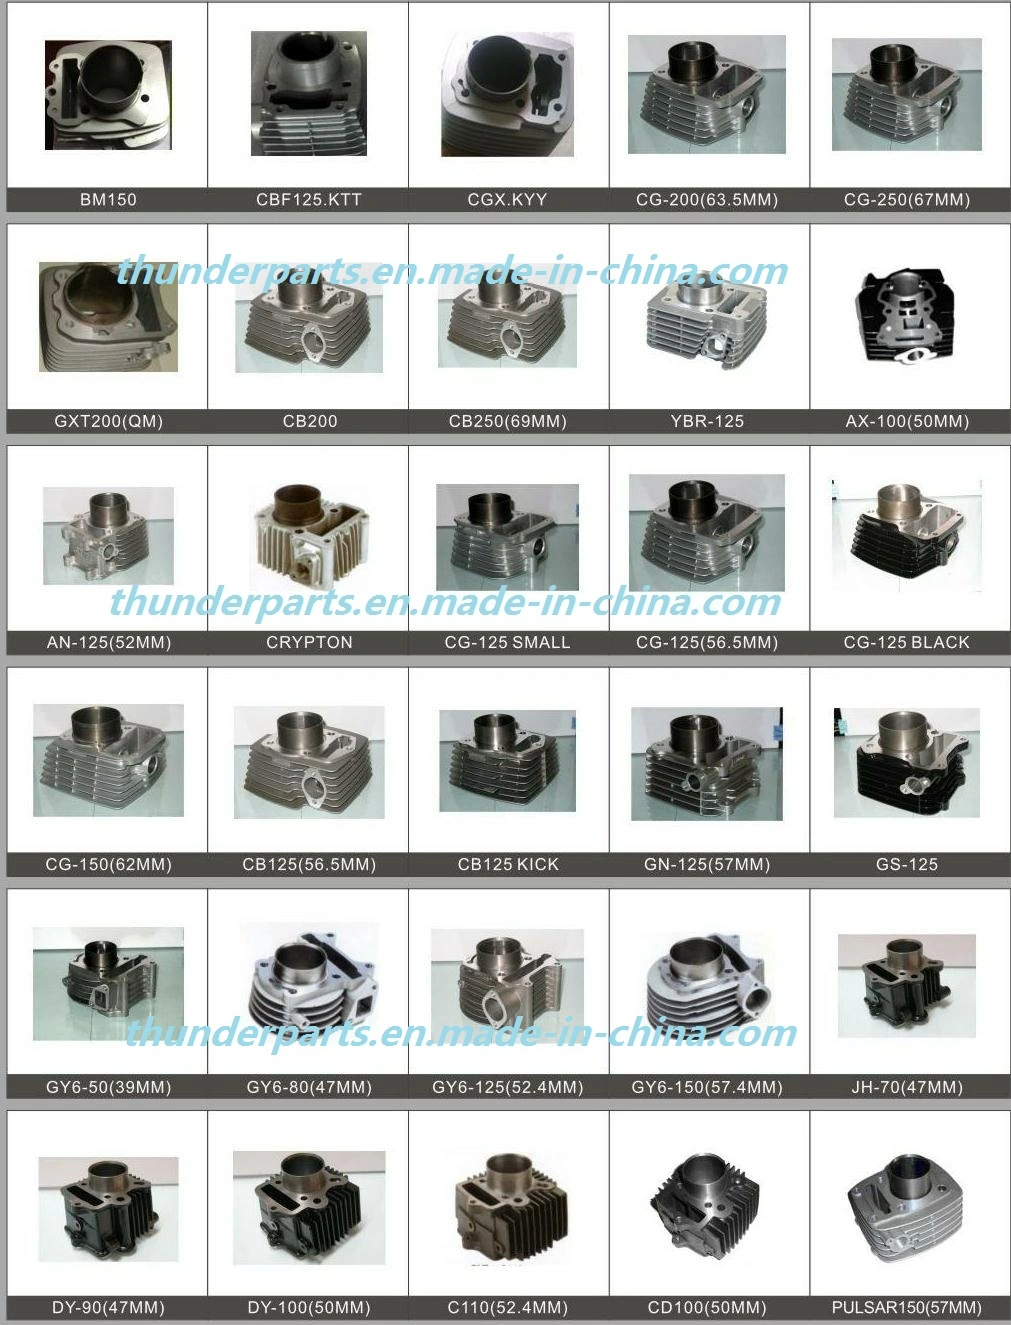 Motorcycle Cylinder Block Kit for Cg125/150/158/174/175/Zs175/Lx175/56.5mm/62mm/62mm